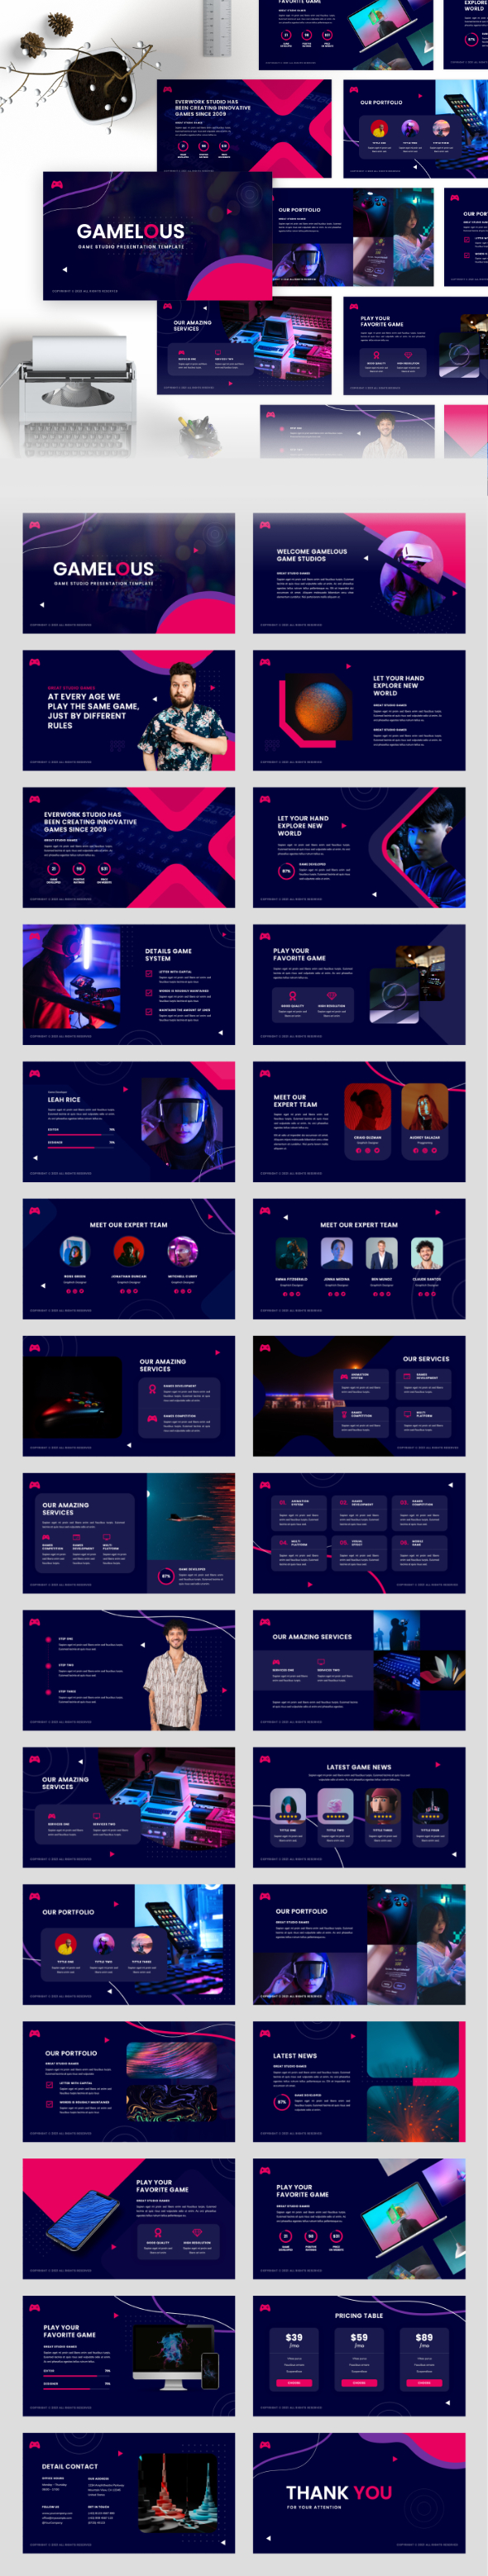 Gamelous - Game Studio PowerPoint Template